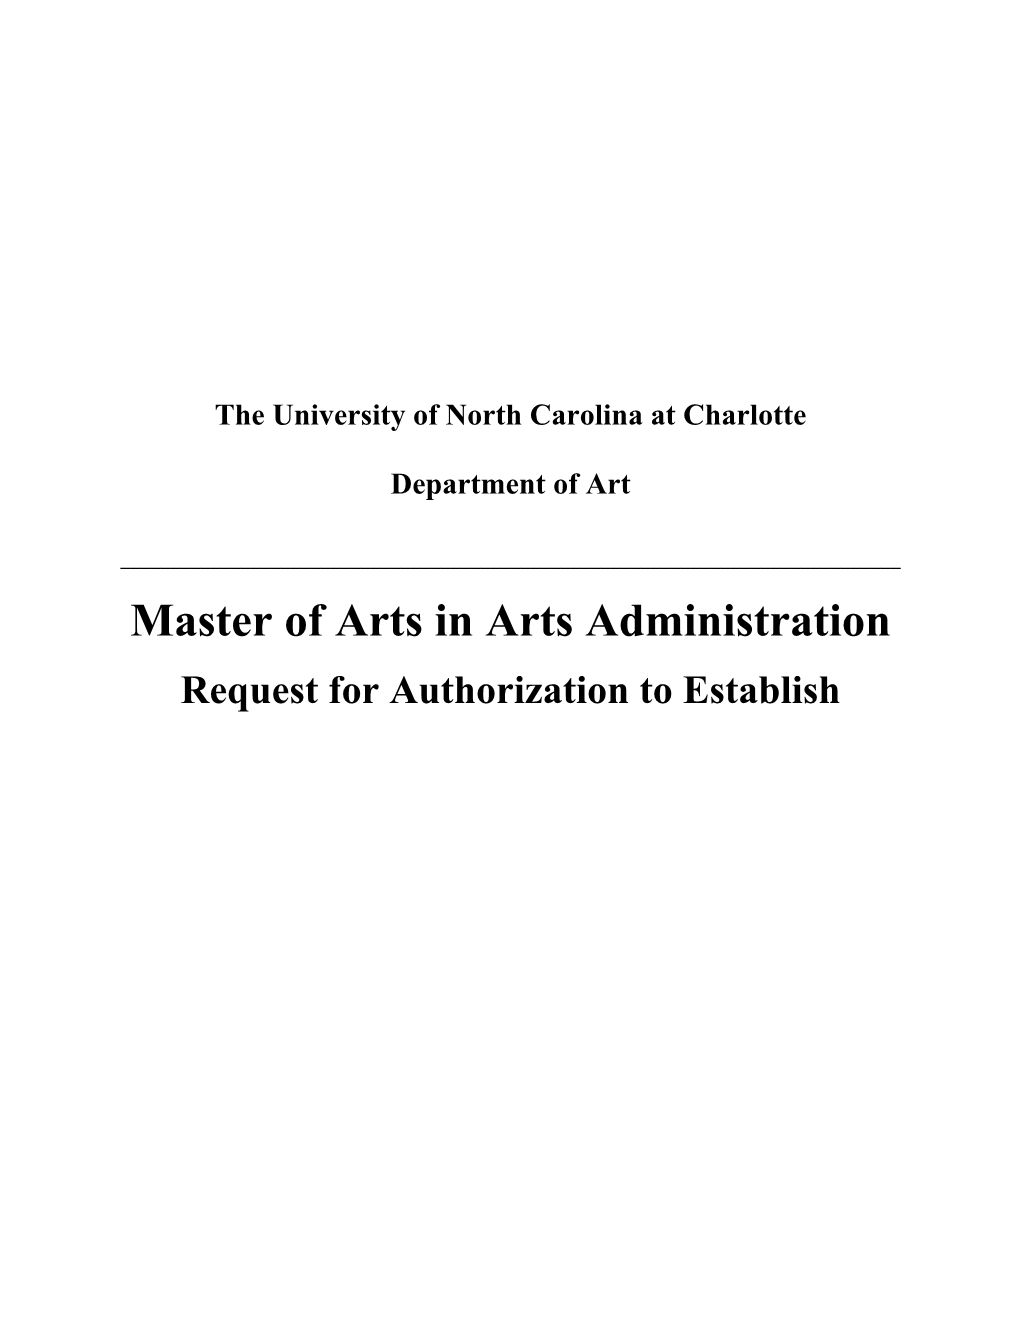 Master of Arts in Arts Administration Request for Authorization to Establish Request to Establish Master of Arts in Arts Administration UNC Charlotte